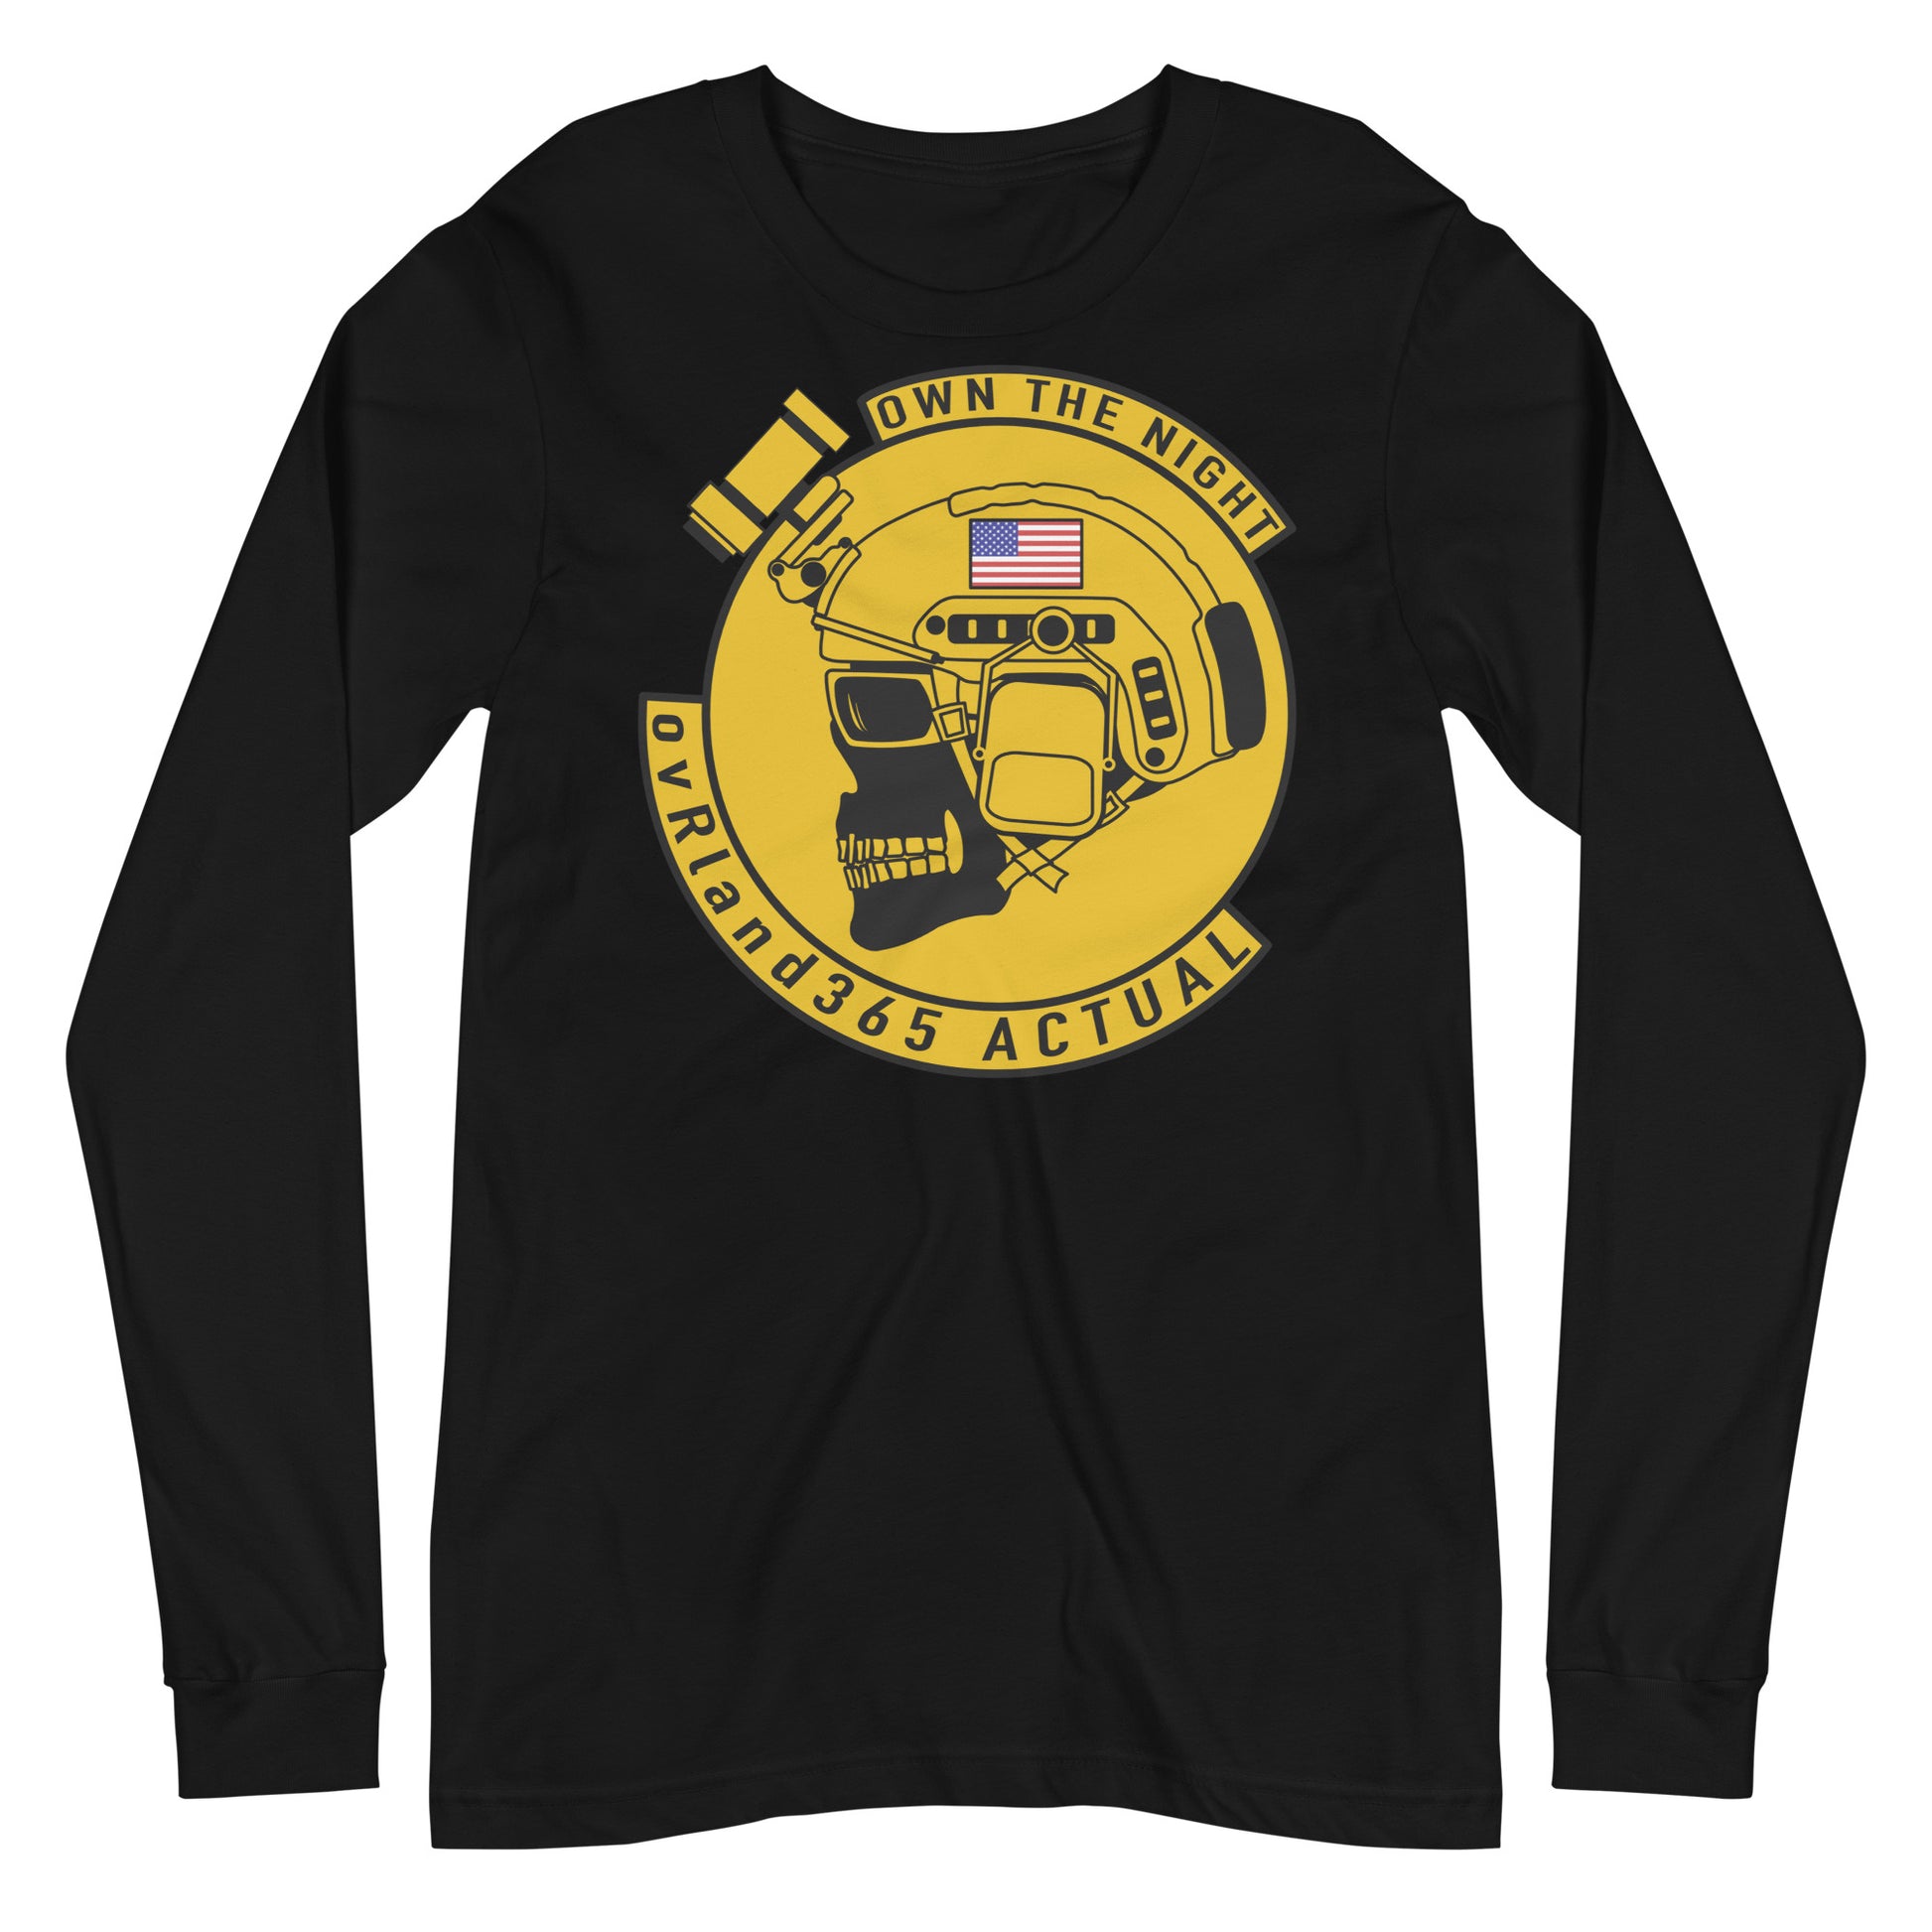 "Own the night." ovRland365 Actual black long-sleeve. overland365.com